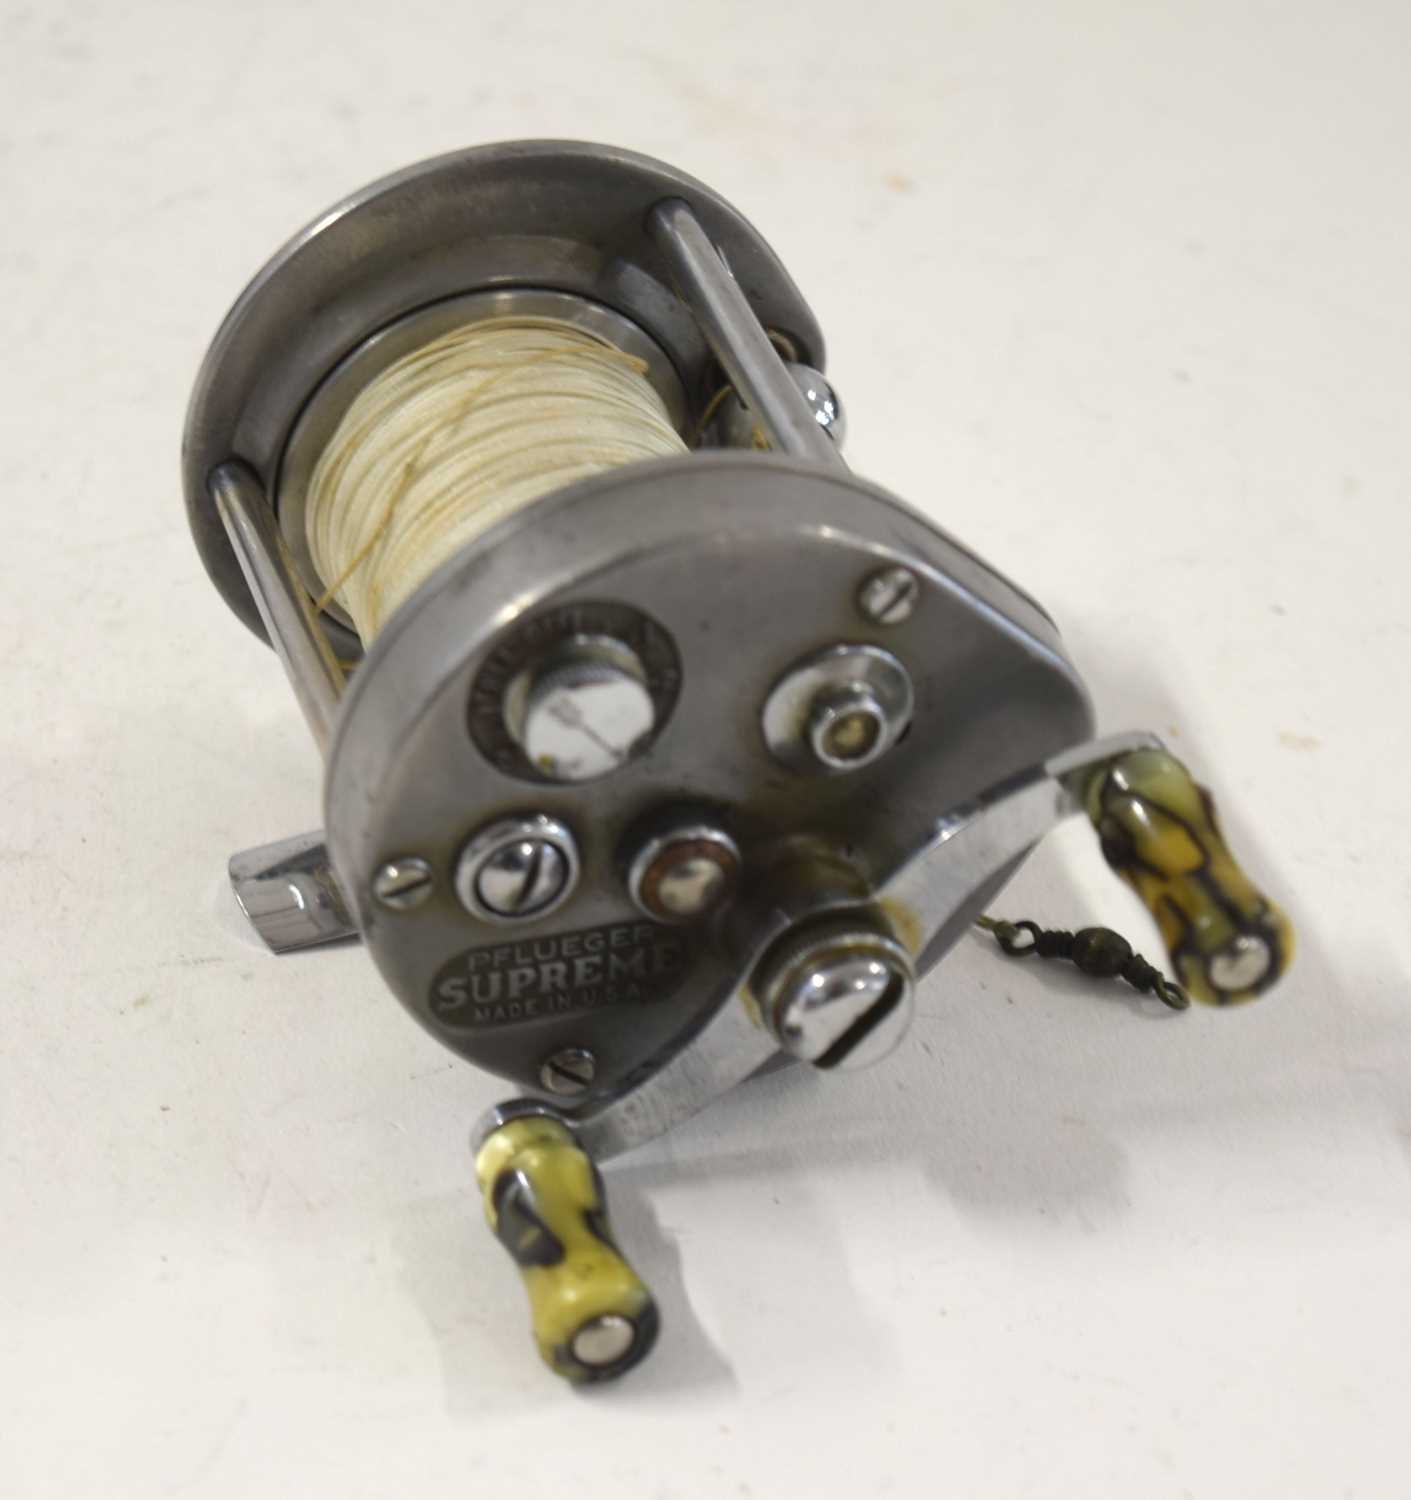 Quantity of three assorted fishing reels to include: Pflueger Supreme fishing reel – made in U.S. - Image 4 of 5